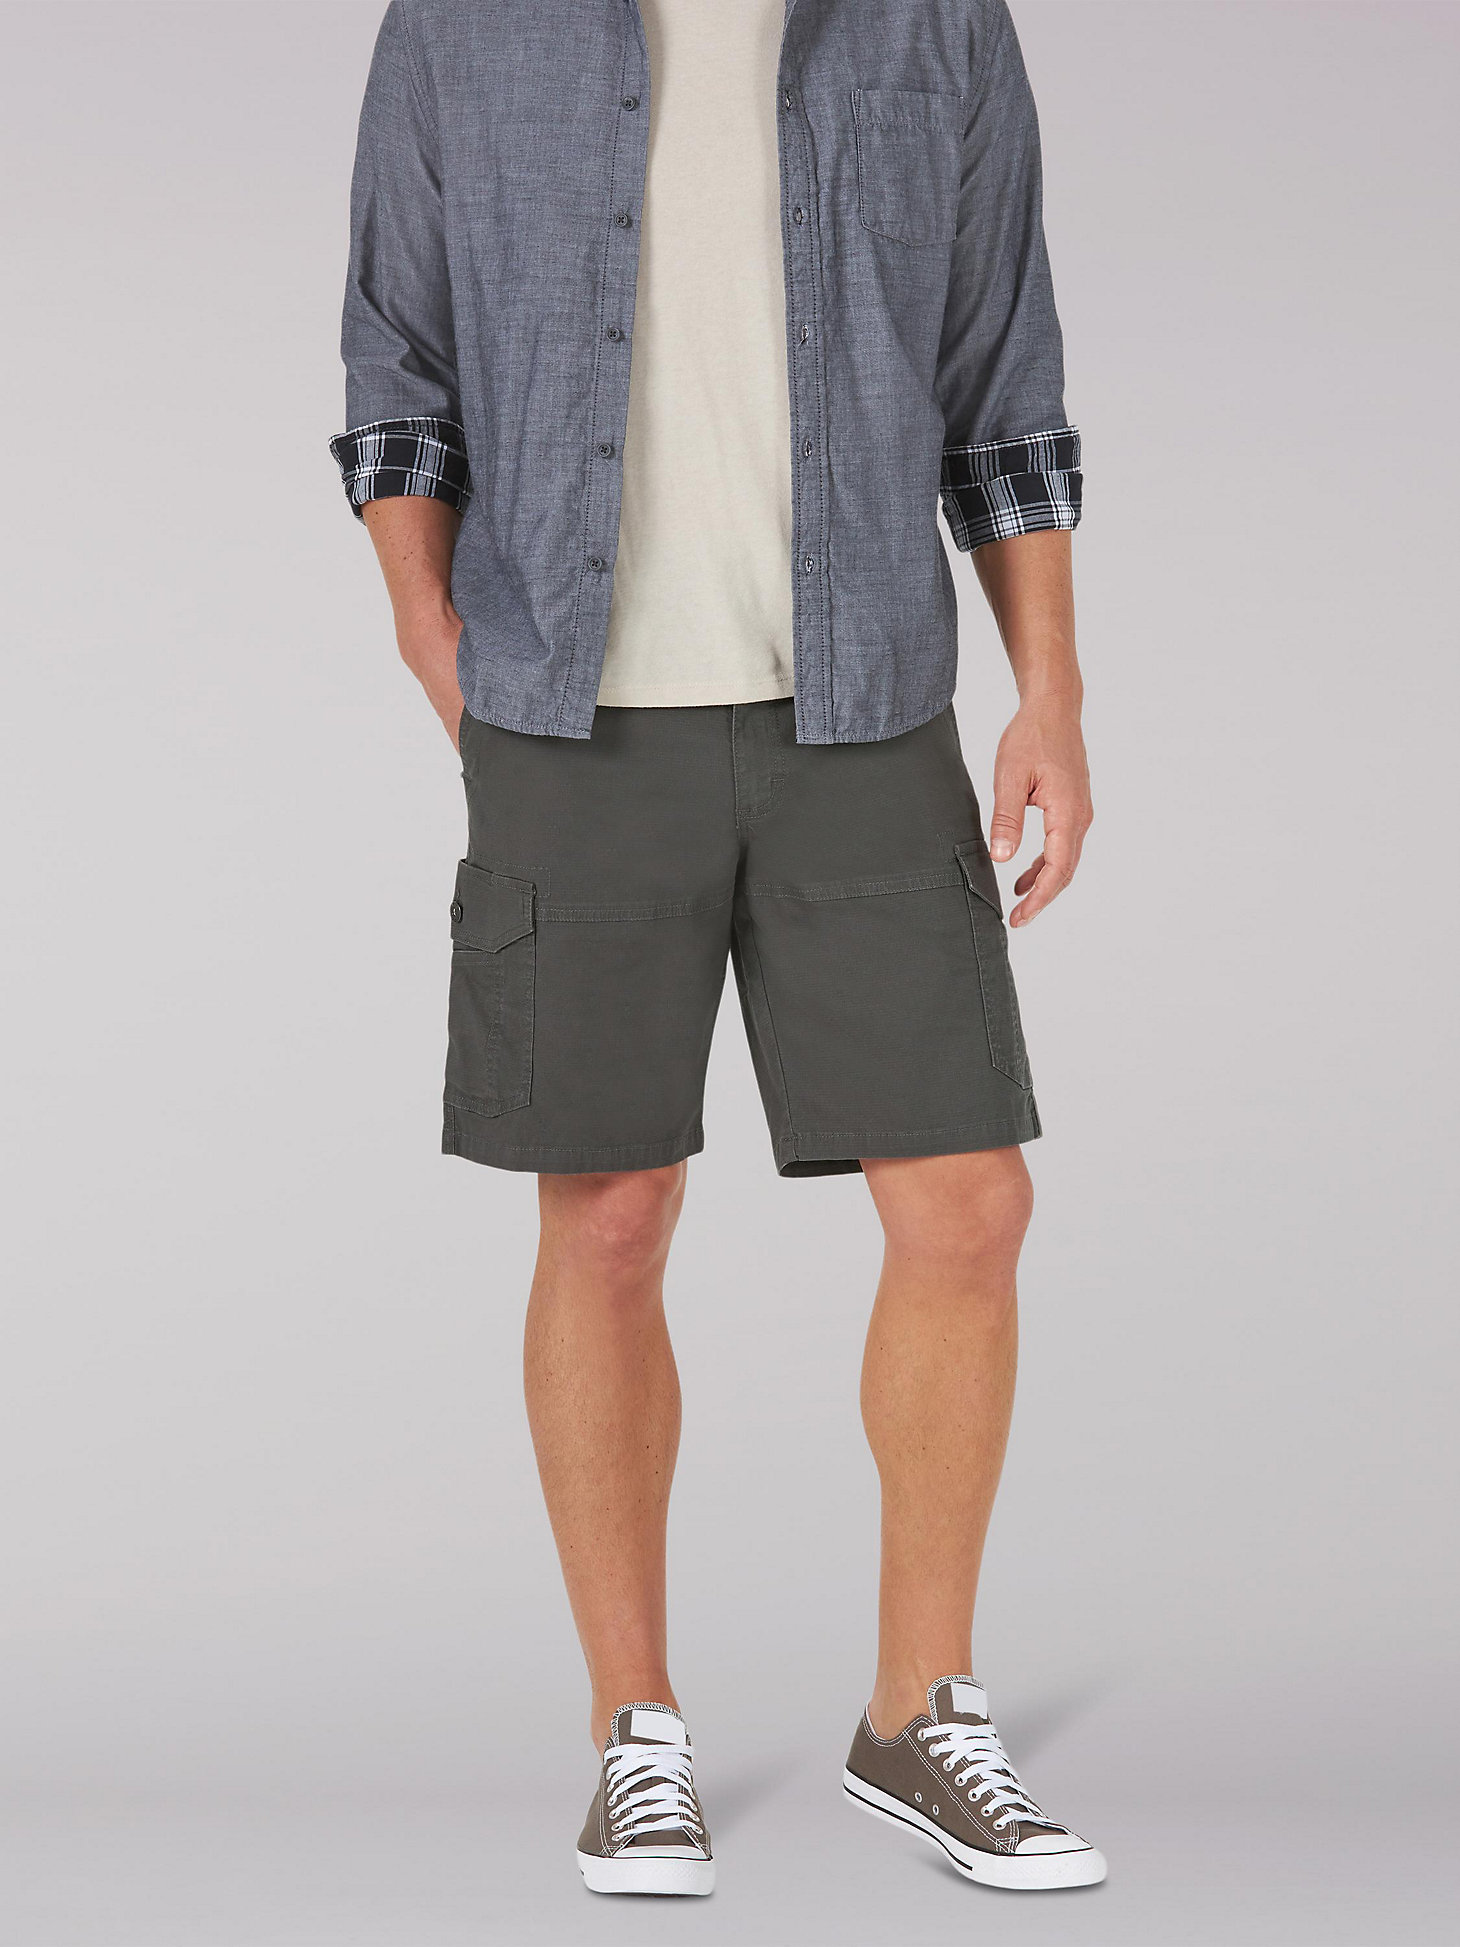 Men's Extreme Motion Swope Short in Engineer main view